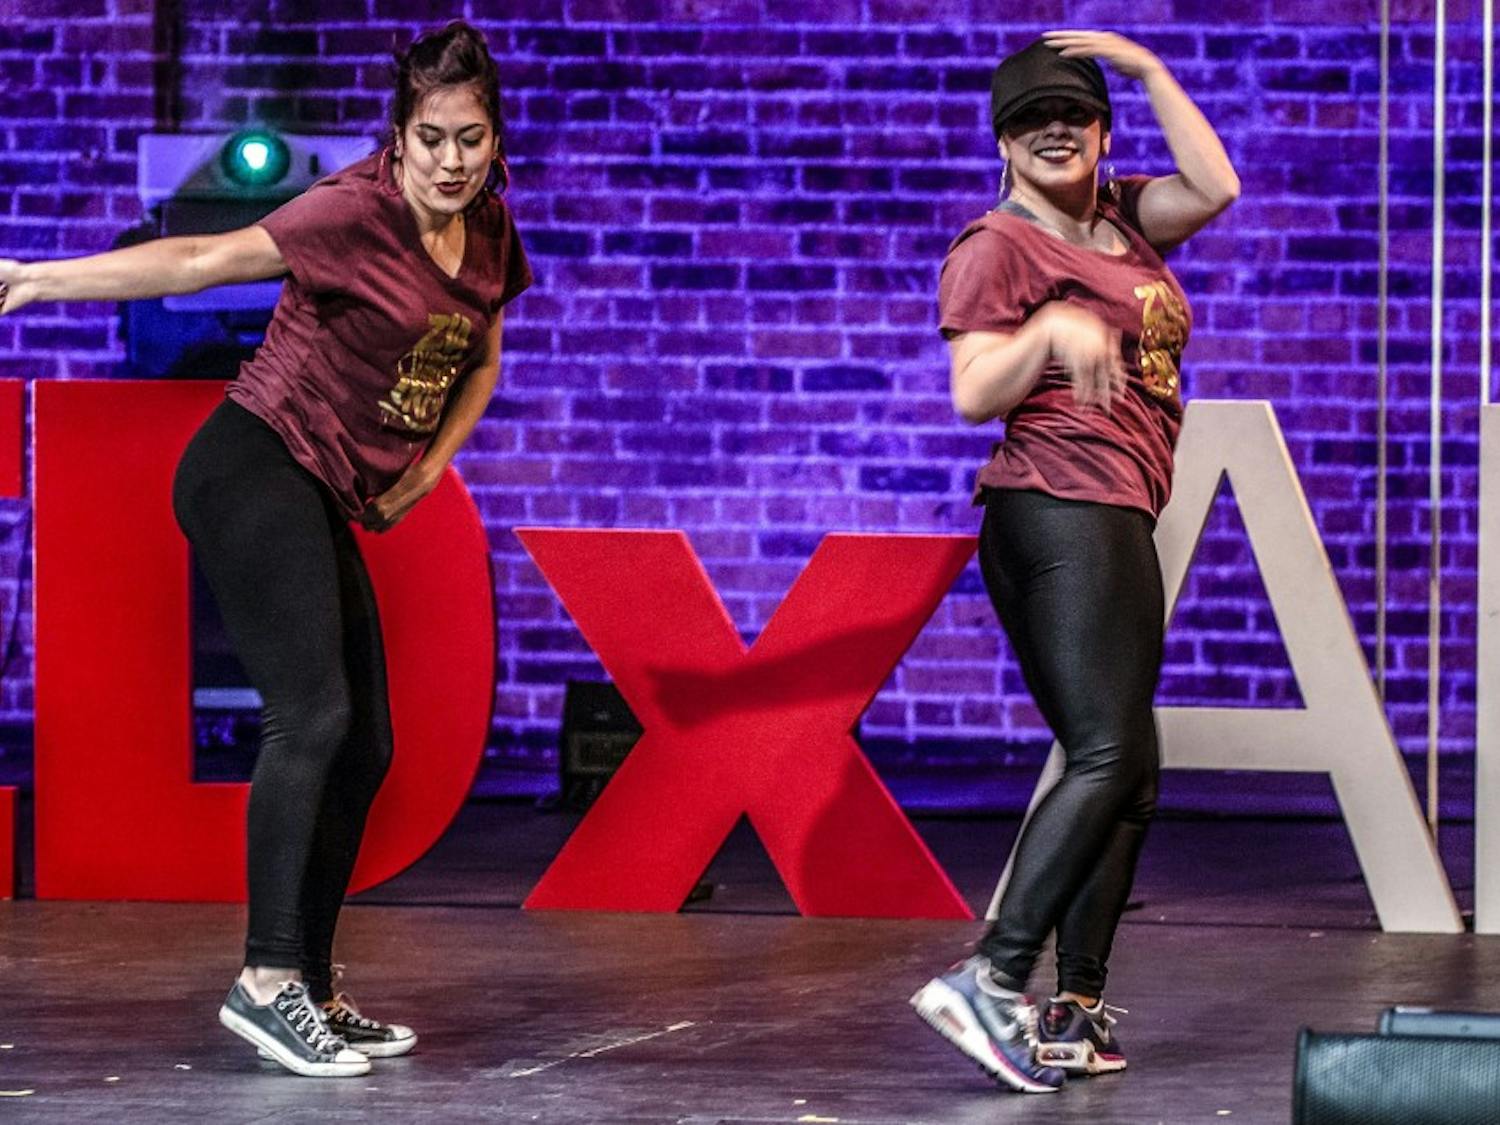 Crystal Zamora, left, and Amanda Valdez perform during the TEDxABQWomen event held at the KiMo Theatre, Nov. 2, 2017.